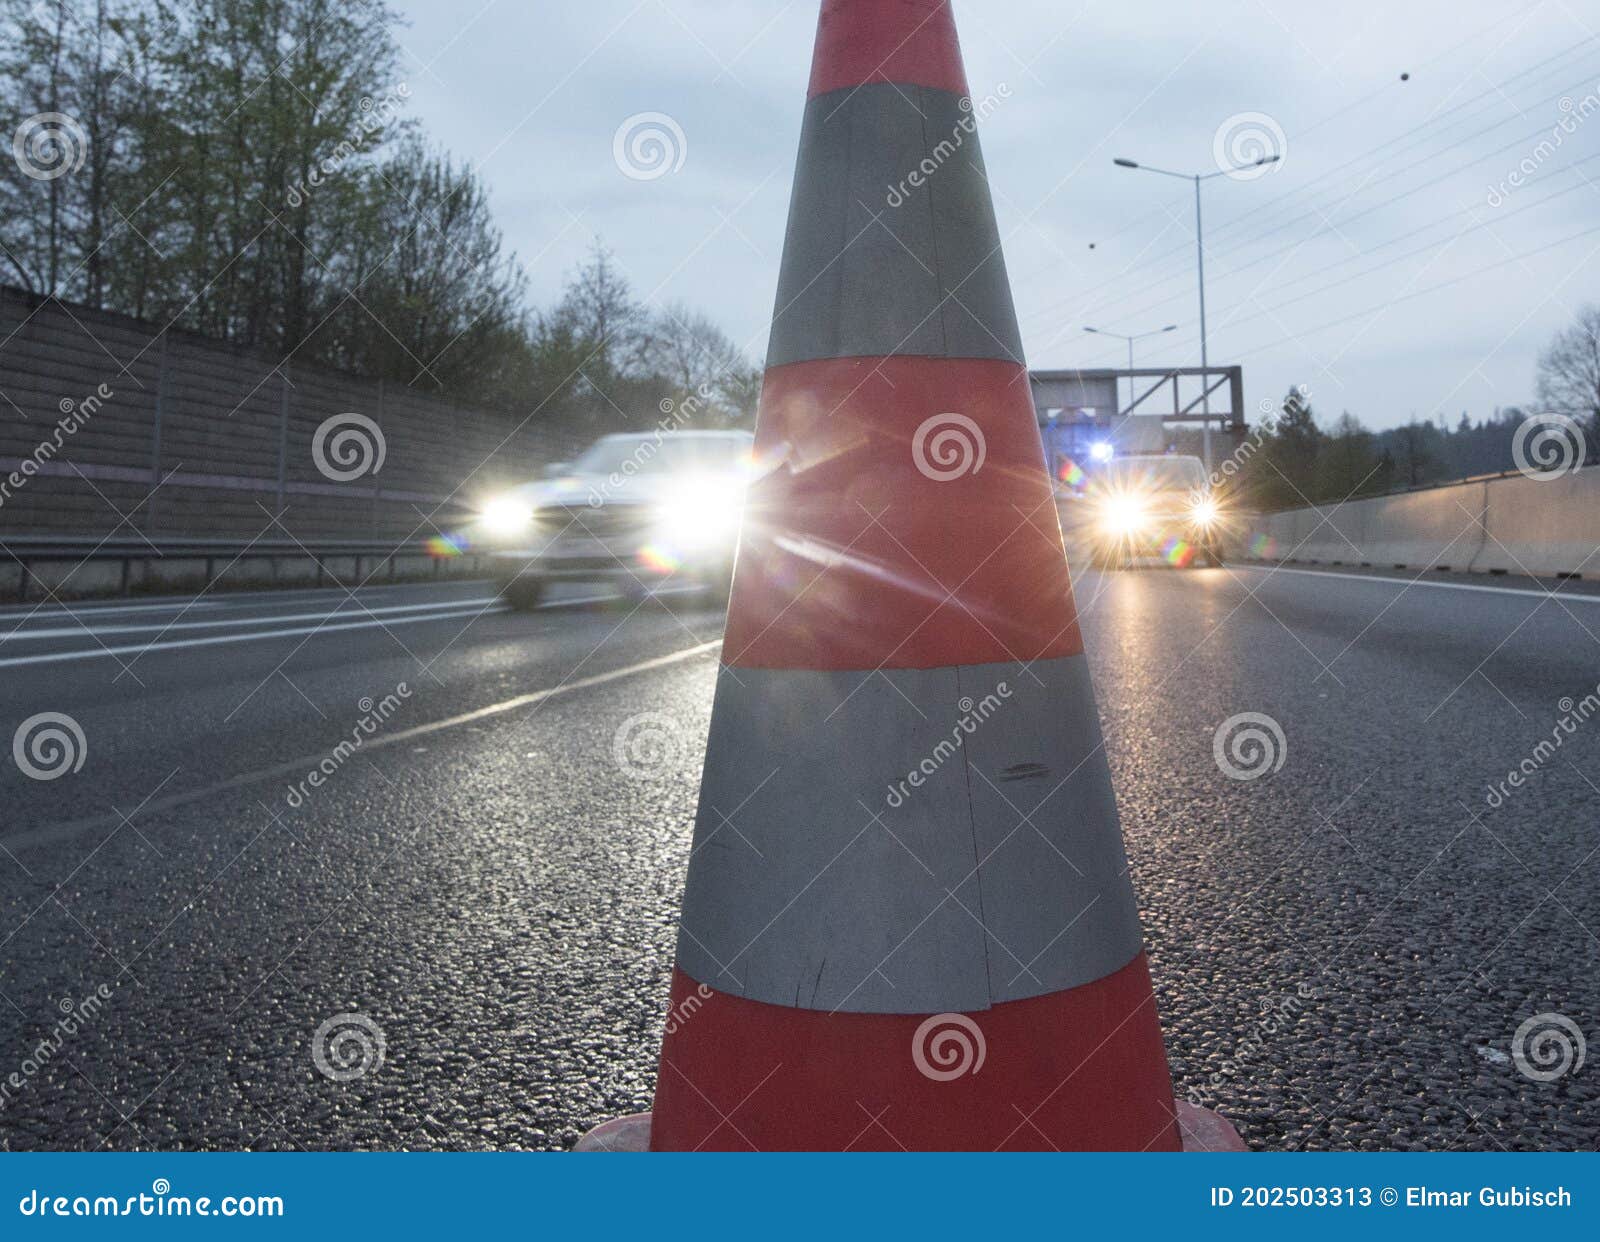 pylons as detour or redirection on a freeway